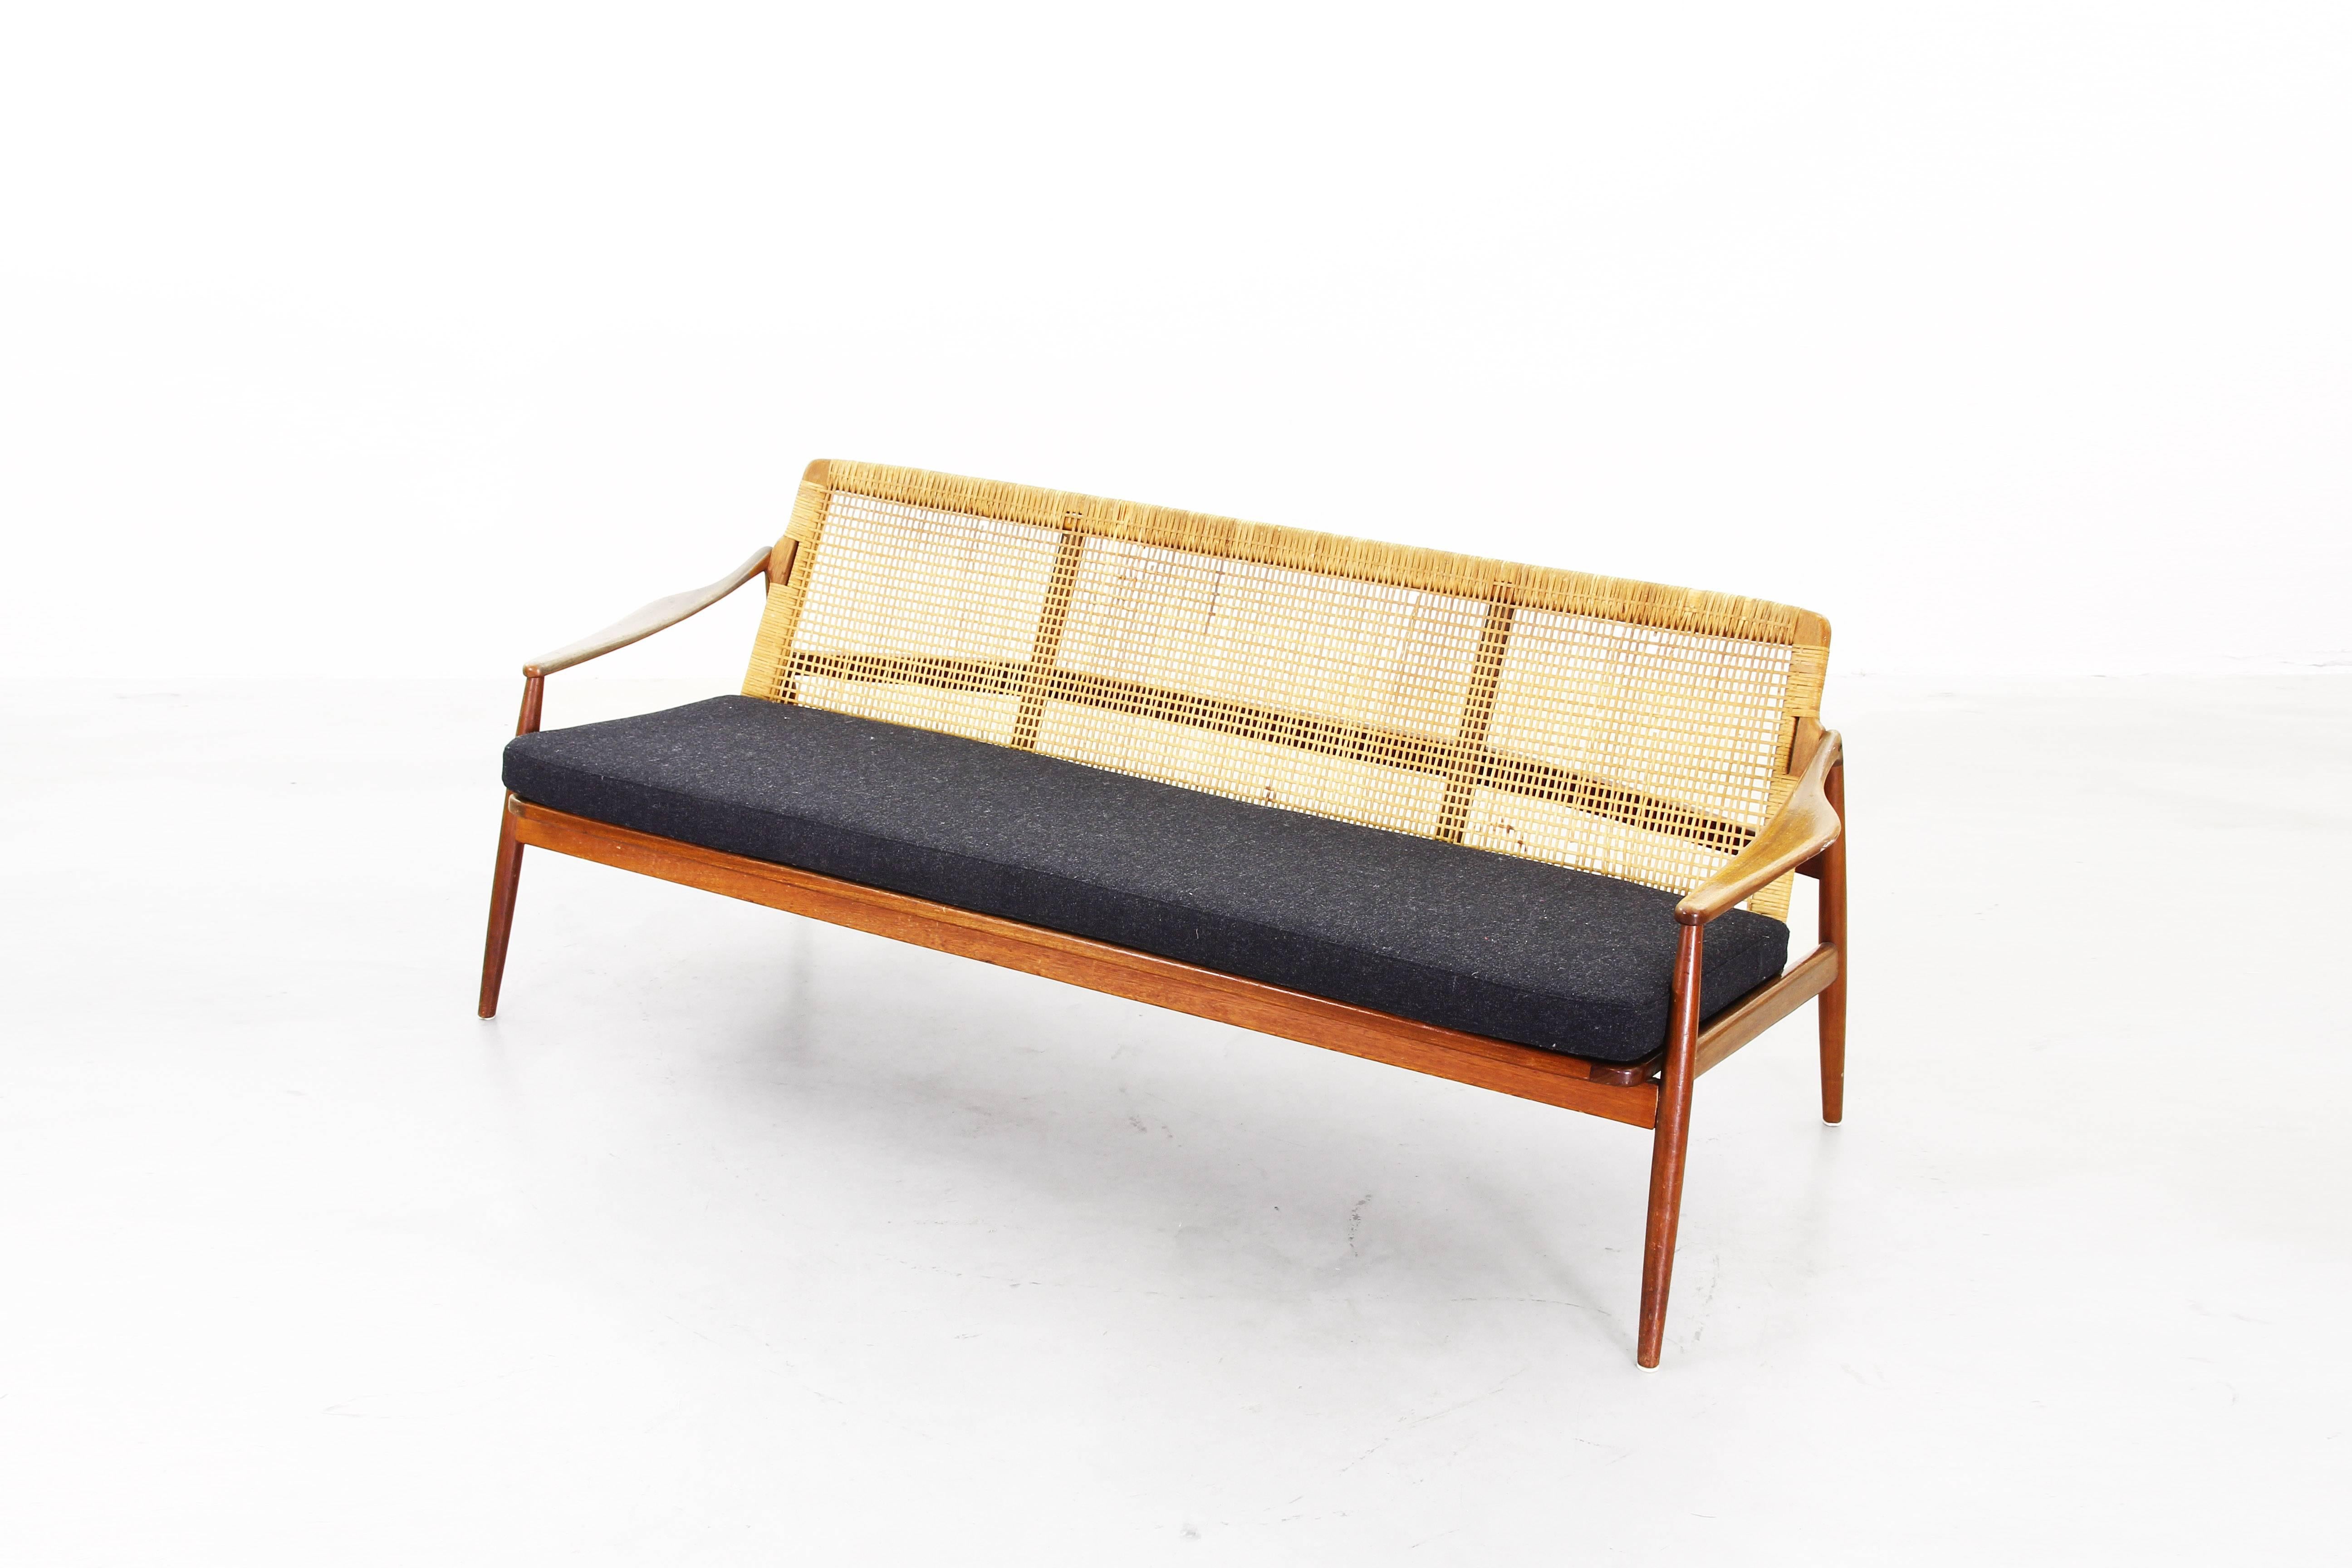 Beautiful Sofa Made of Teak by Hartmut Lohmeyer for Wilkhahn, 1950s, Germany For Sale 1